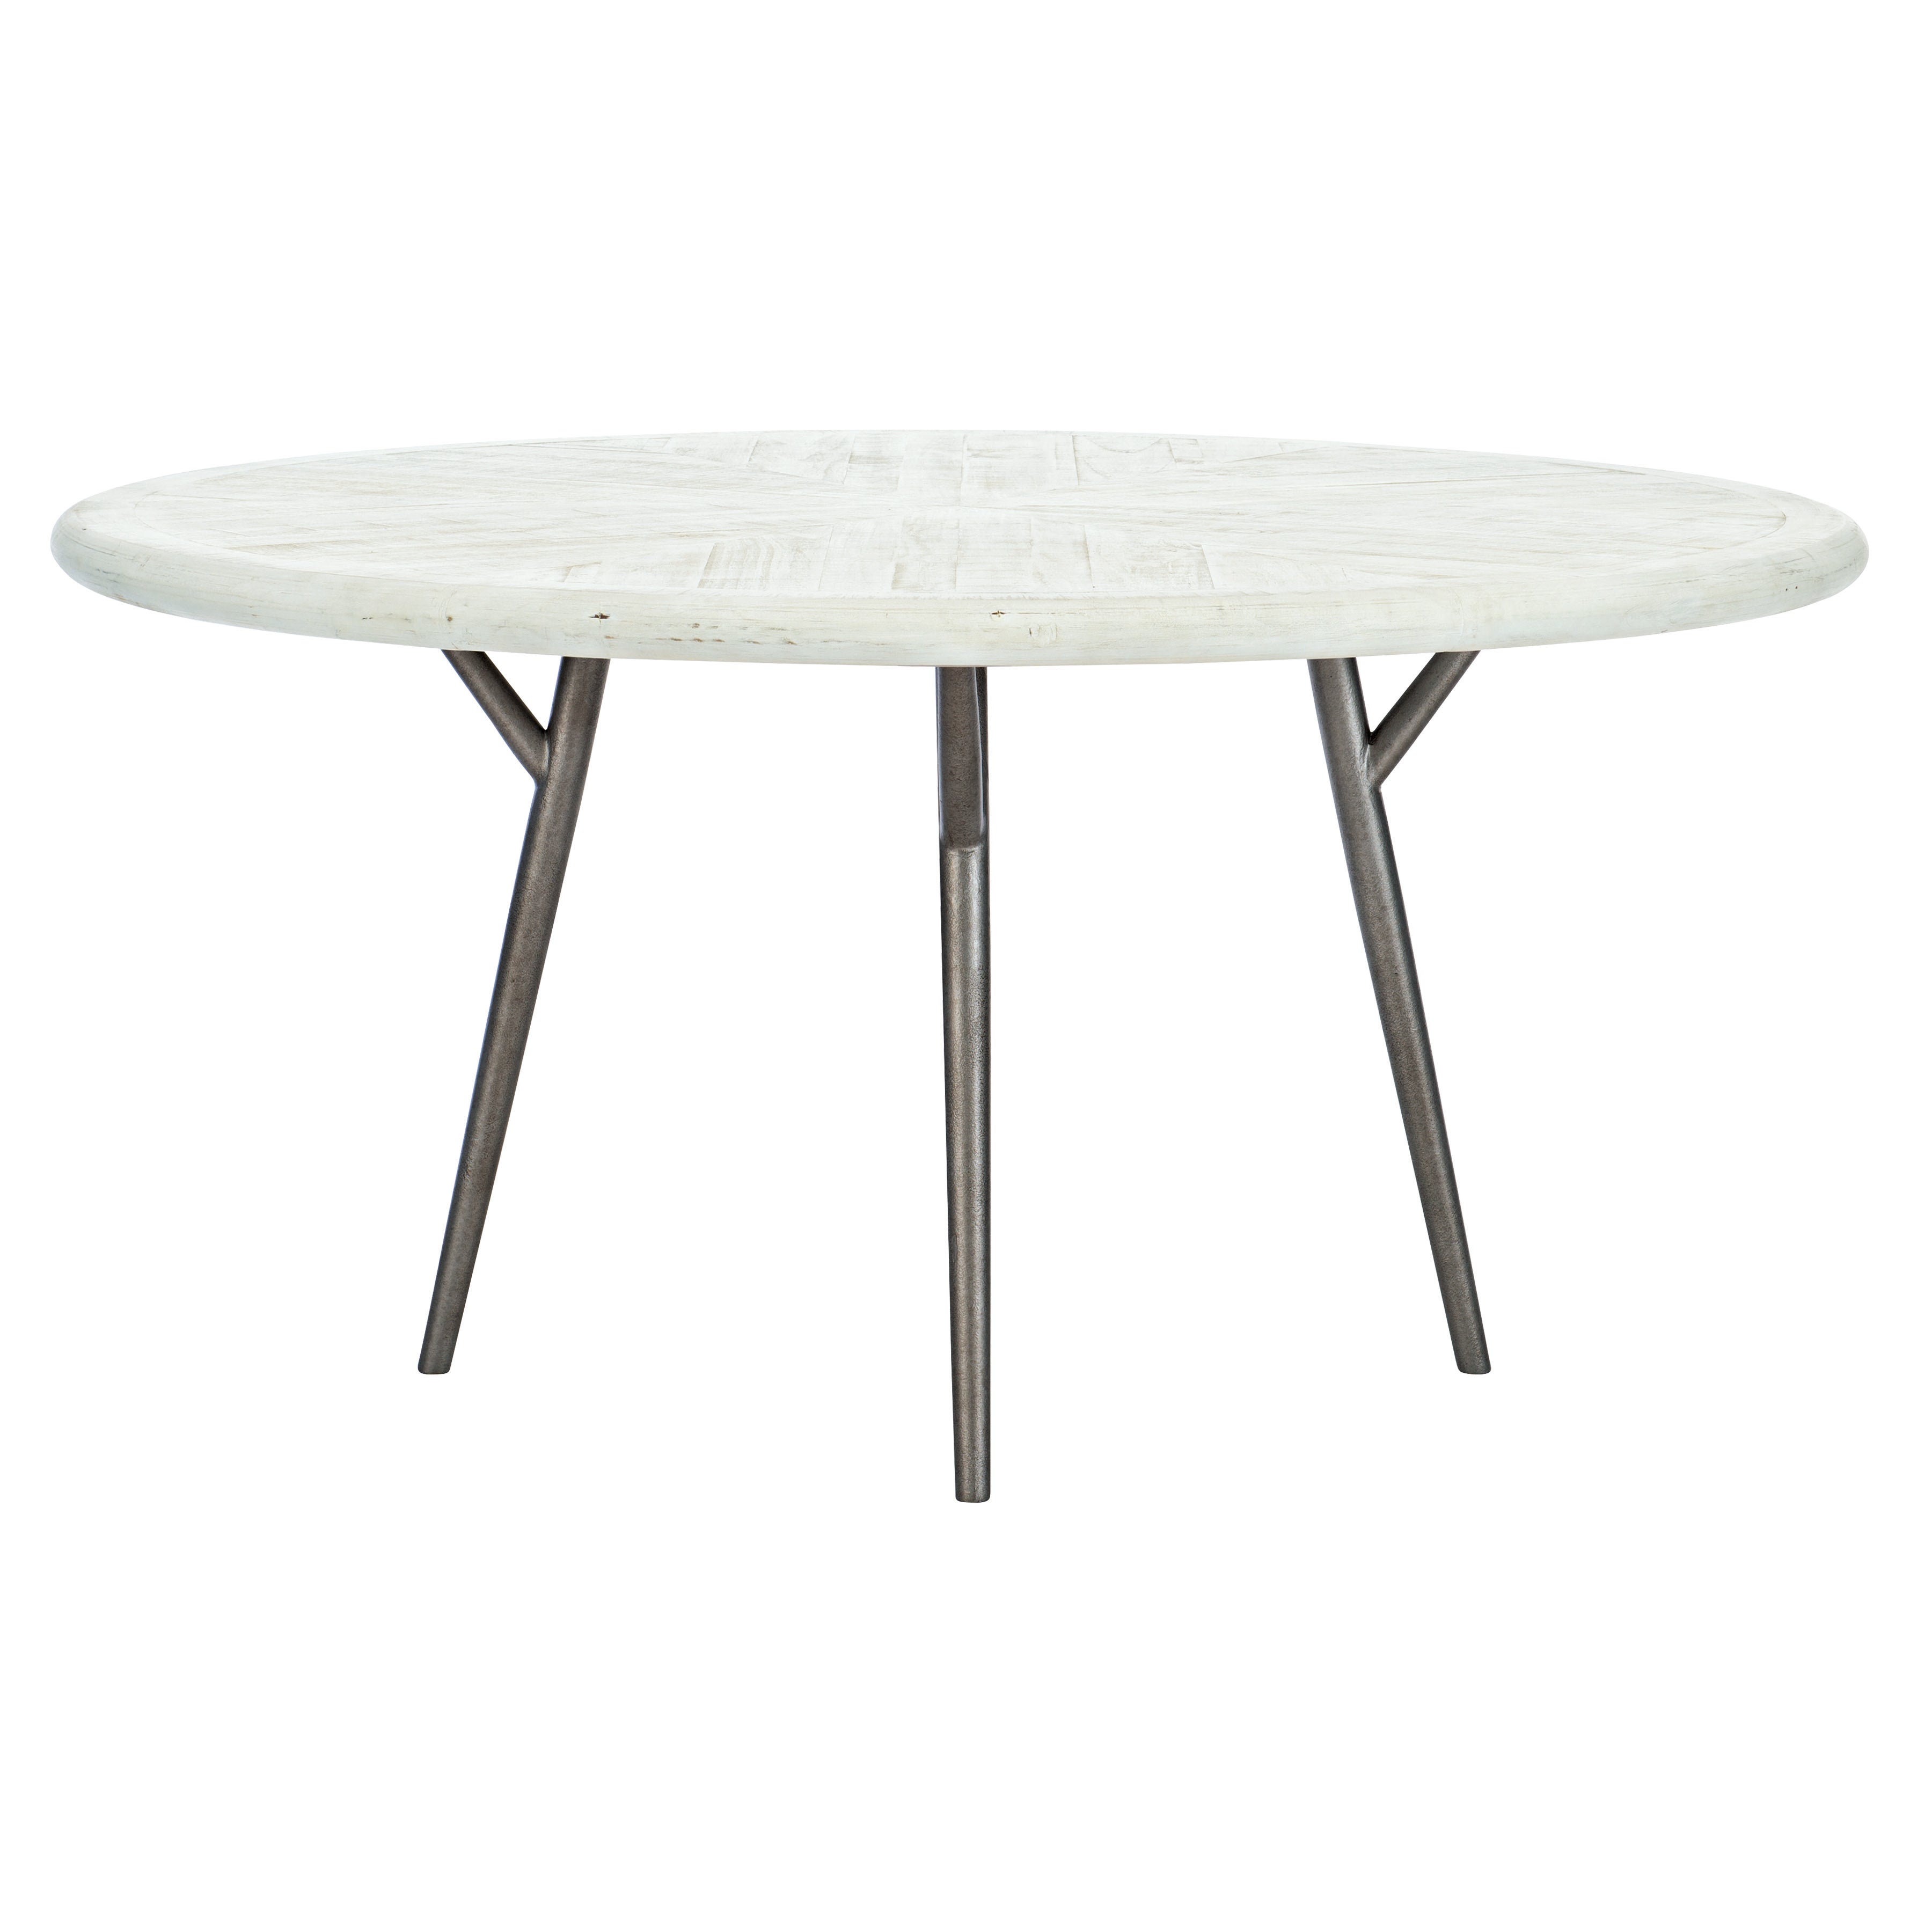 Presley Round Dining Table